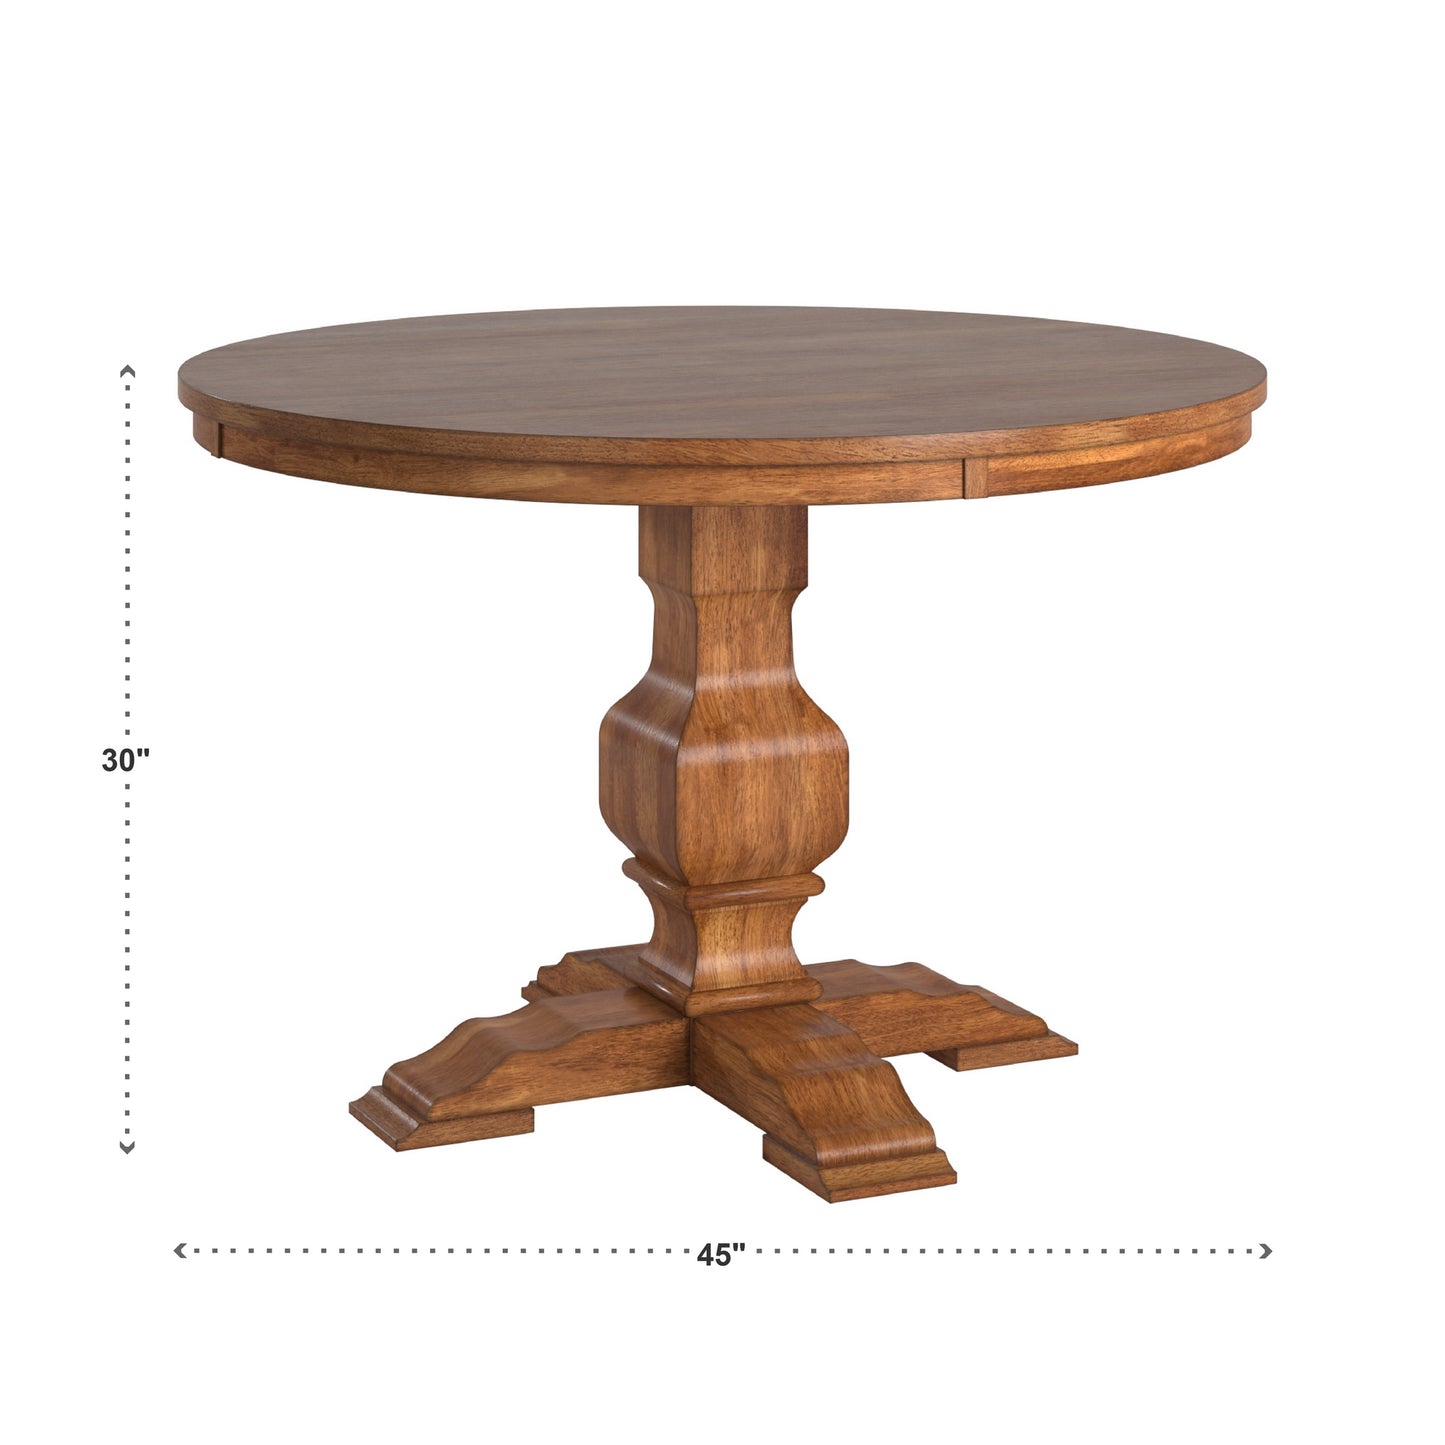 Two-Tone Round Solid Wood Top Dining Table - Oak Top with Oak Base